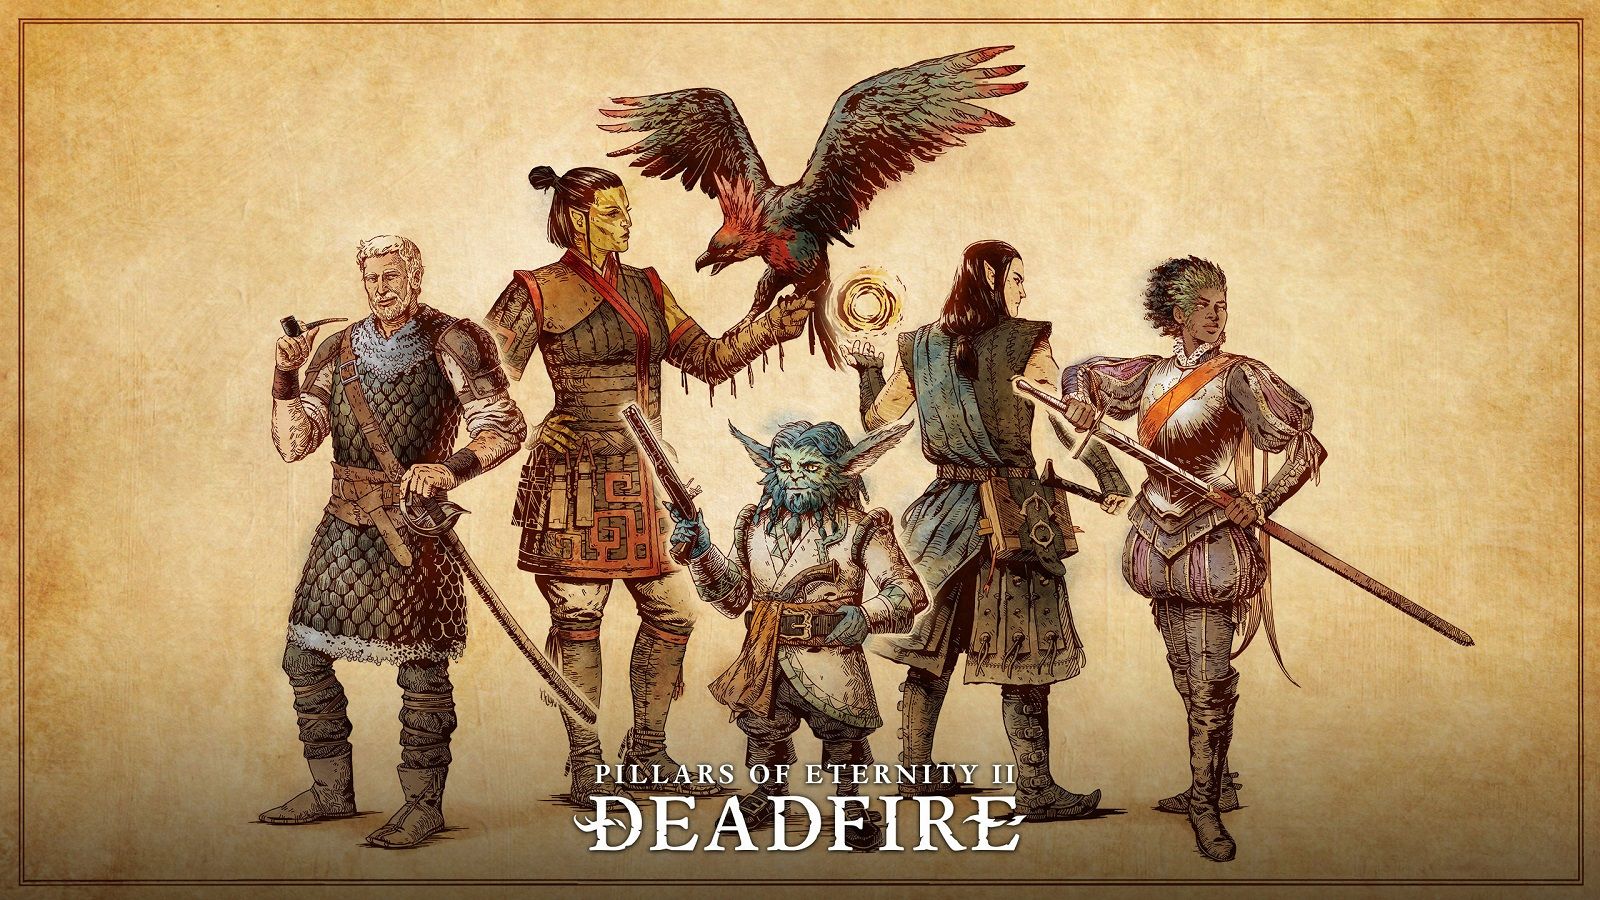 THQ Nordic and Versus Evil to obtain exclusive distribution rights for Pillars of Eternity II: Deadfire